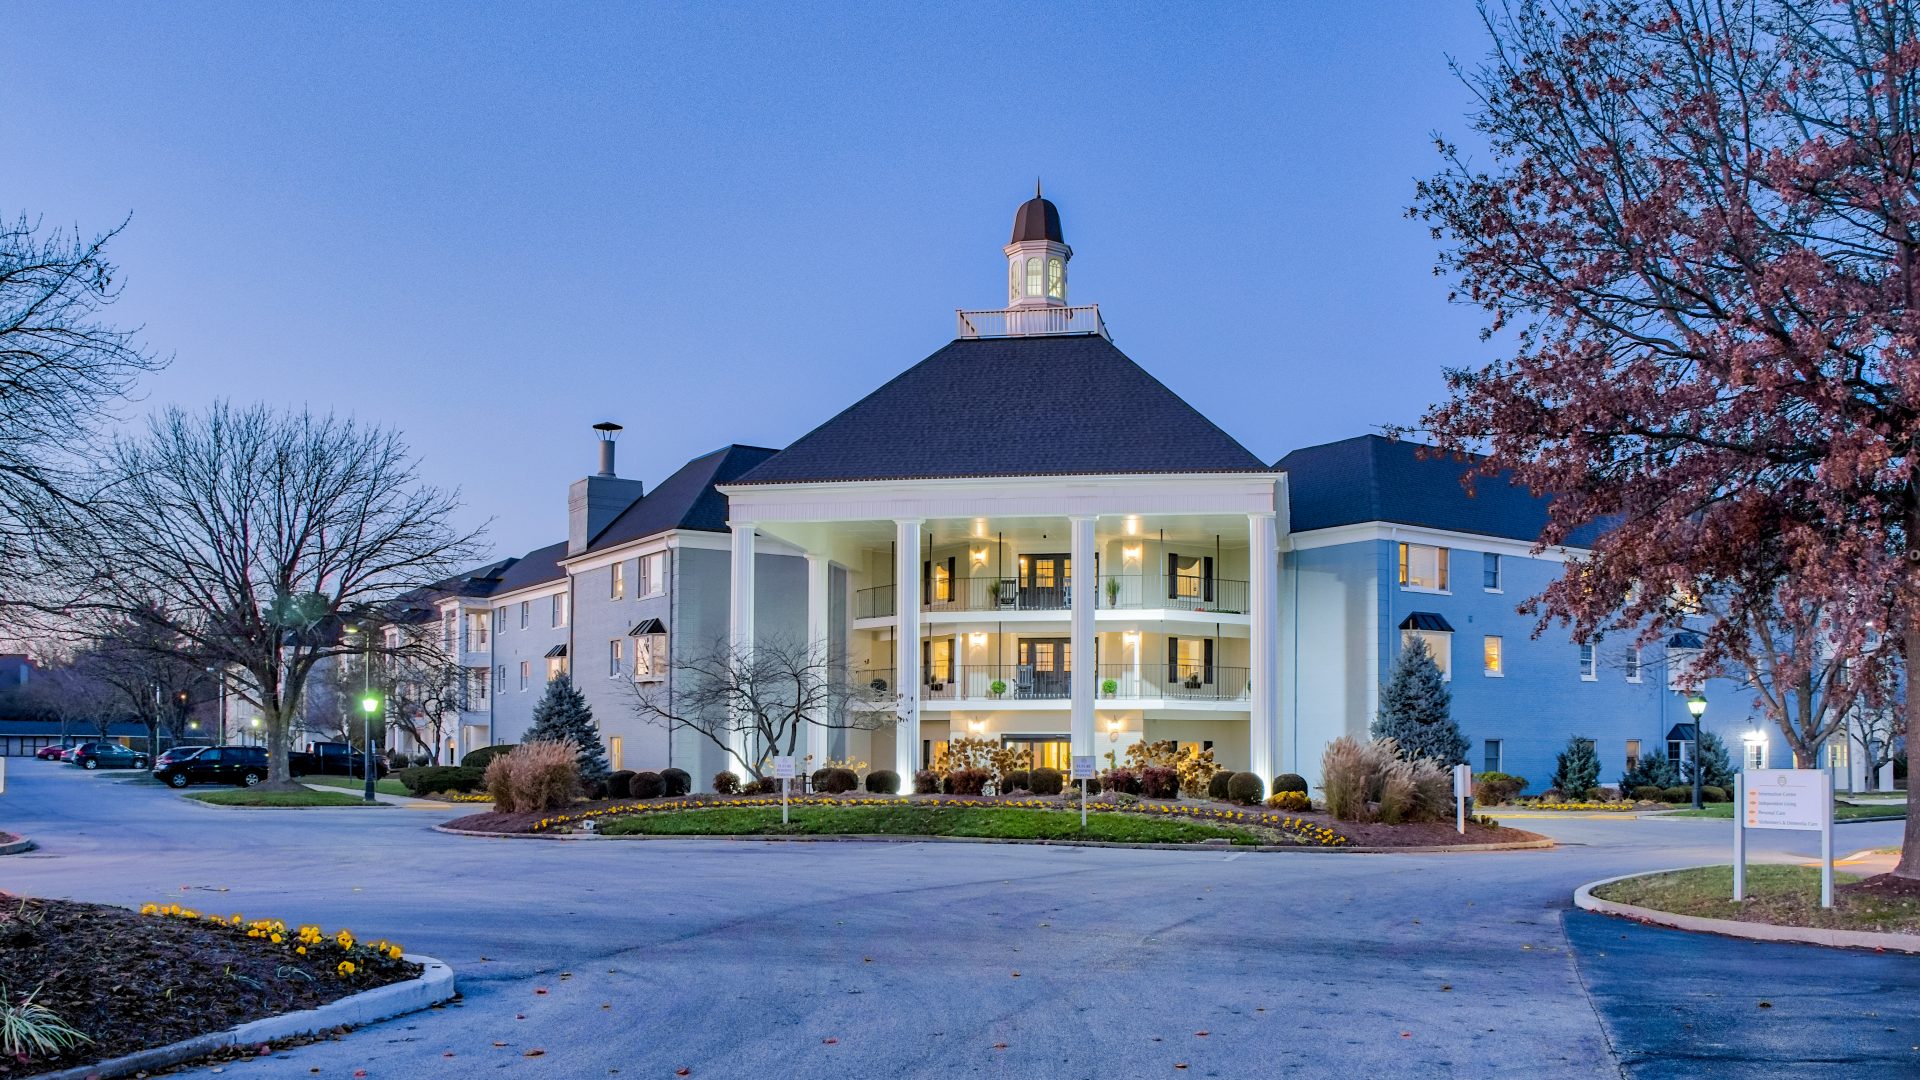 Elegant living community with grand entrance, illuminated columns, and landscaped surroundings.